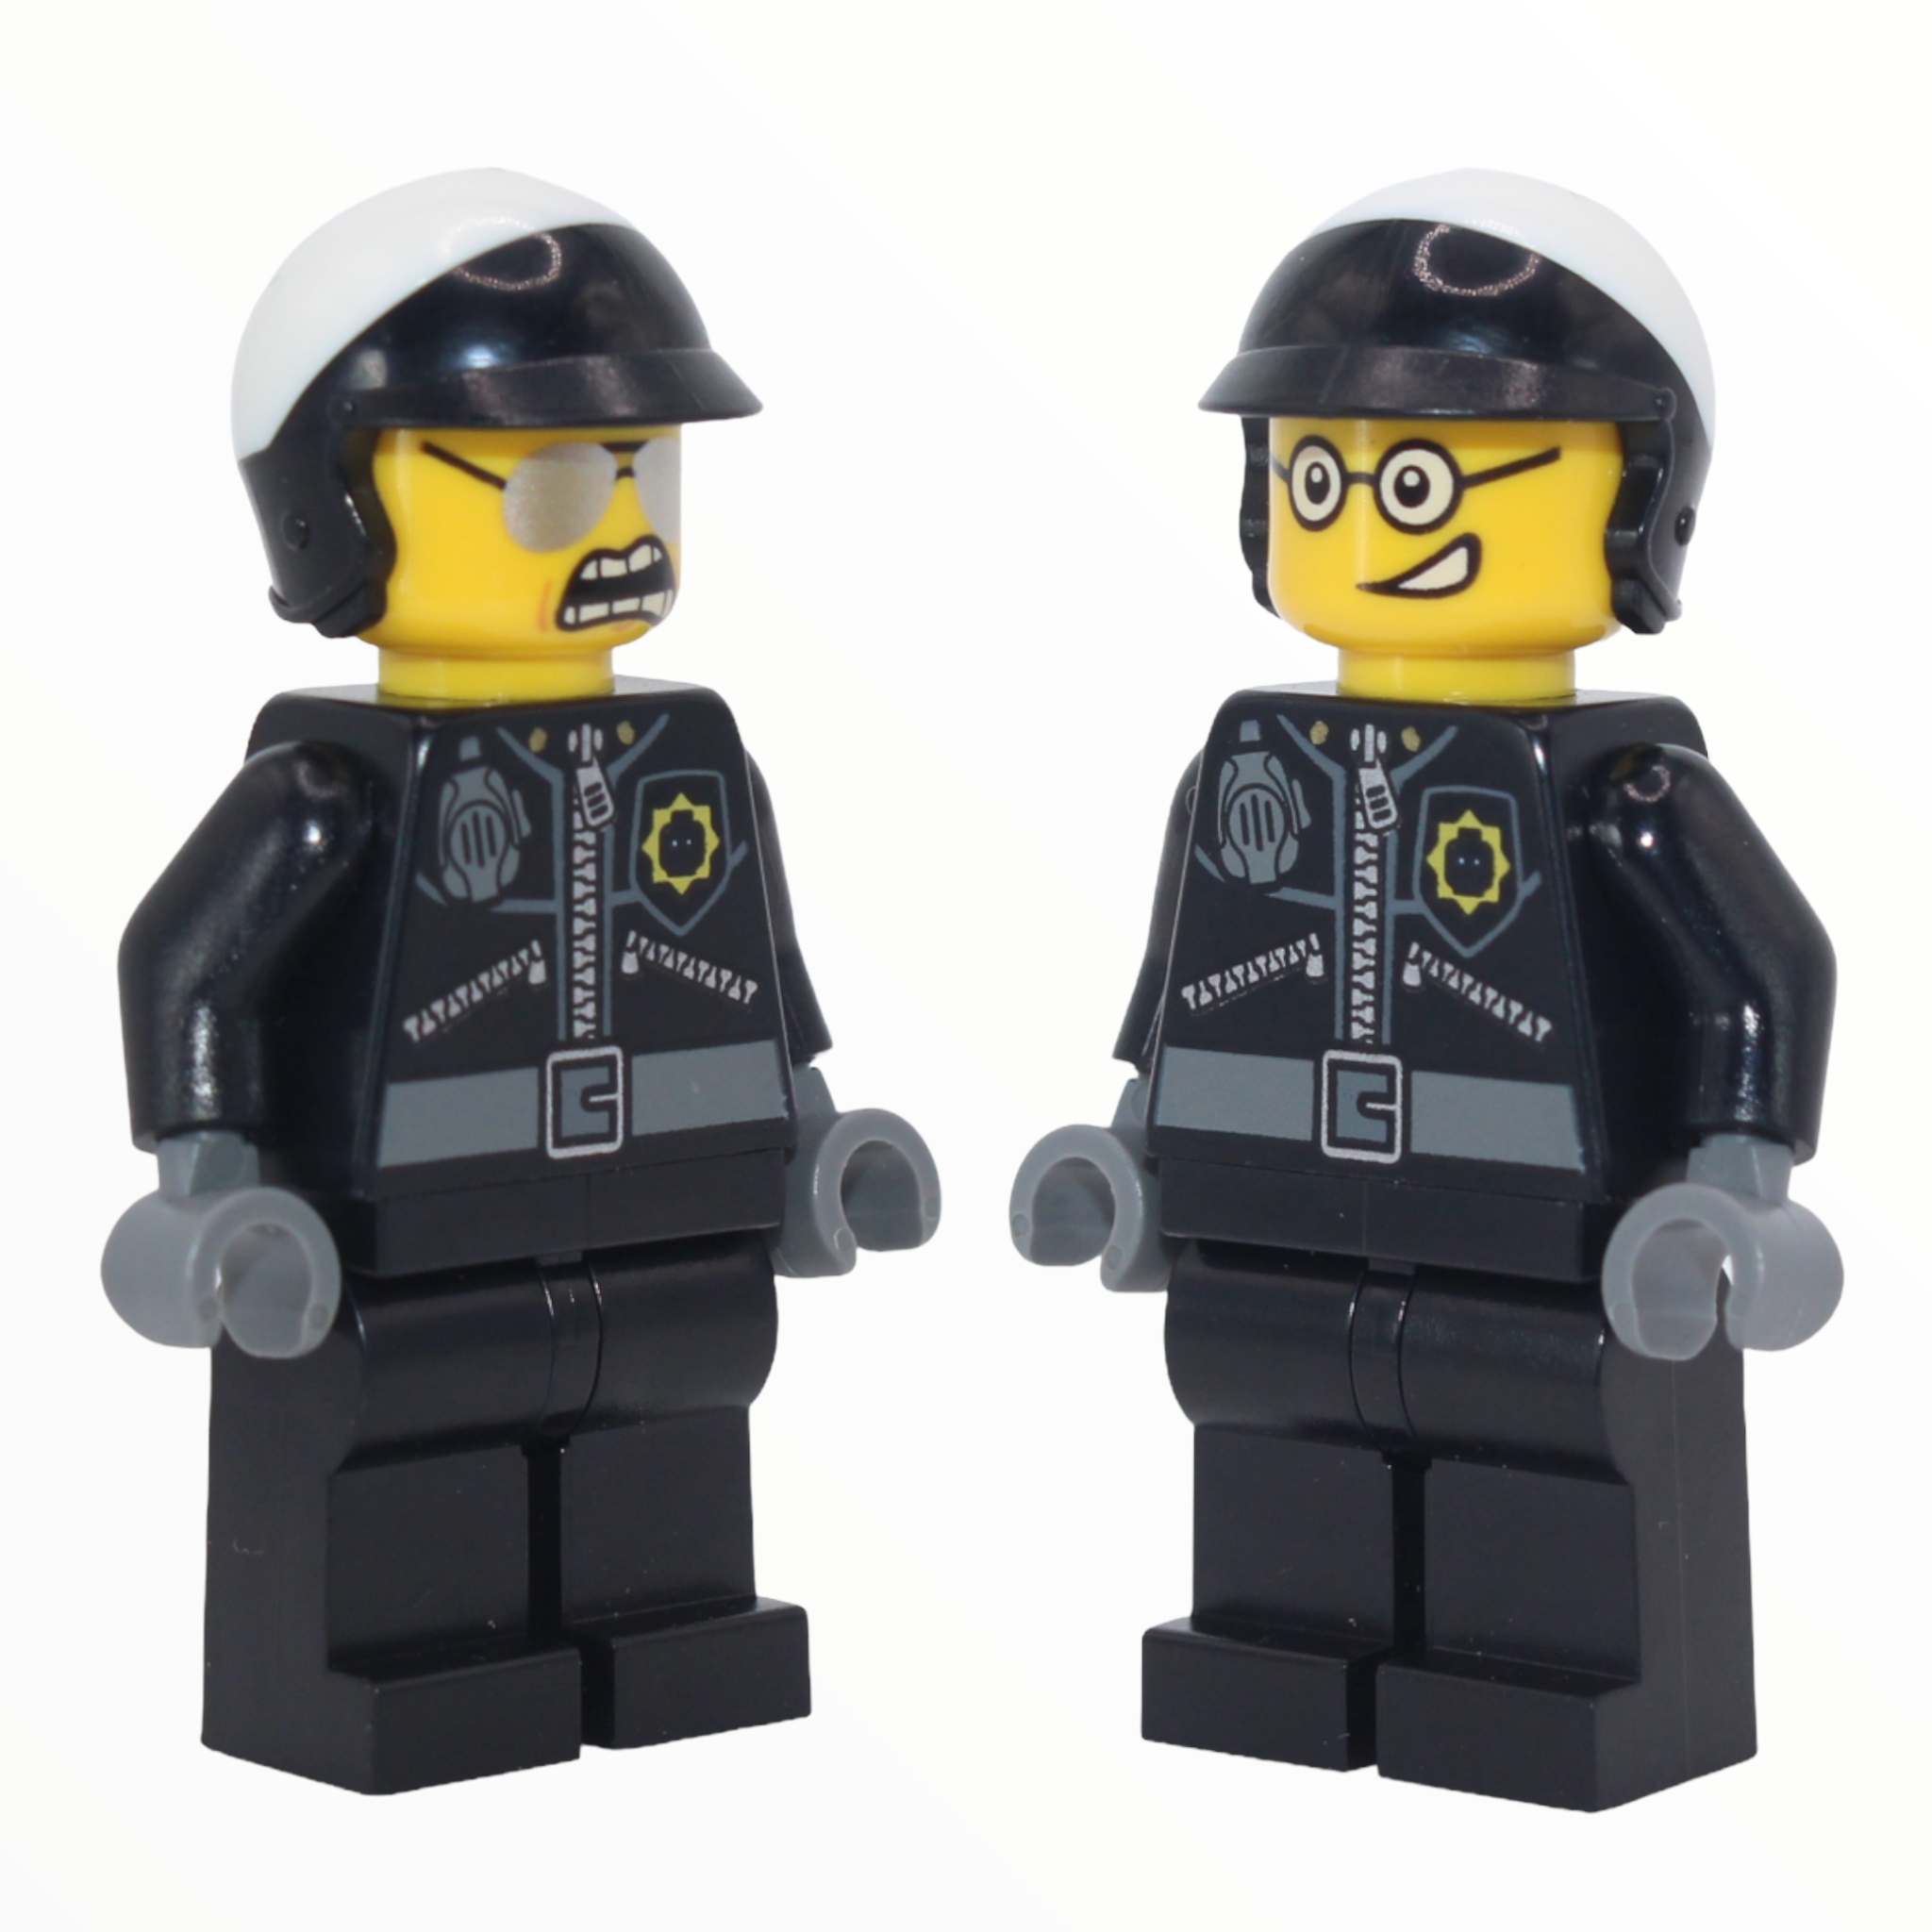 Good Cop / Bad Cop (crooked smile, open mouth angry, Dimensions)